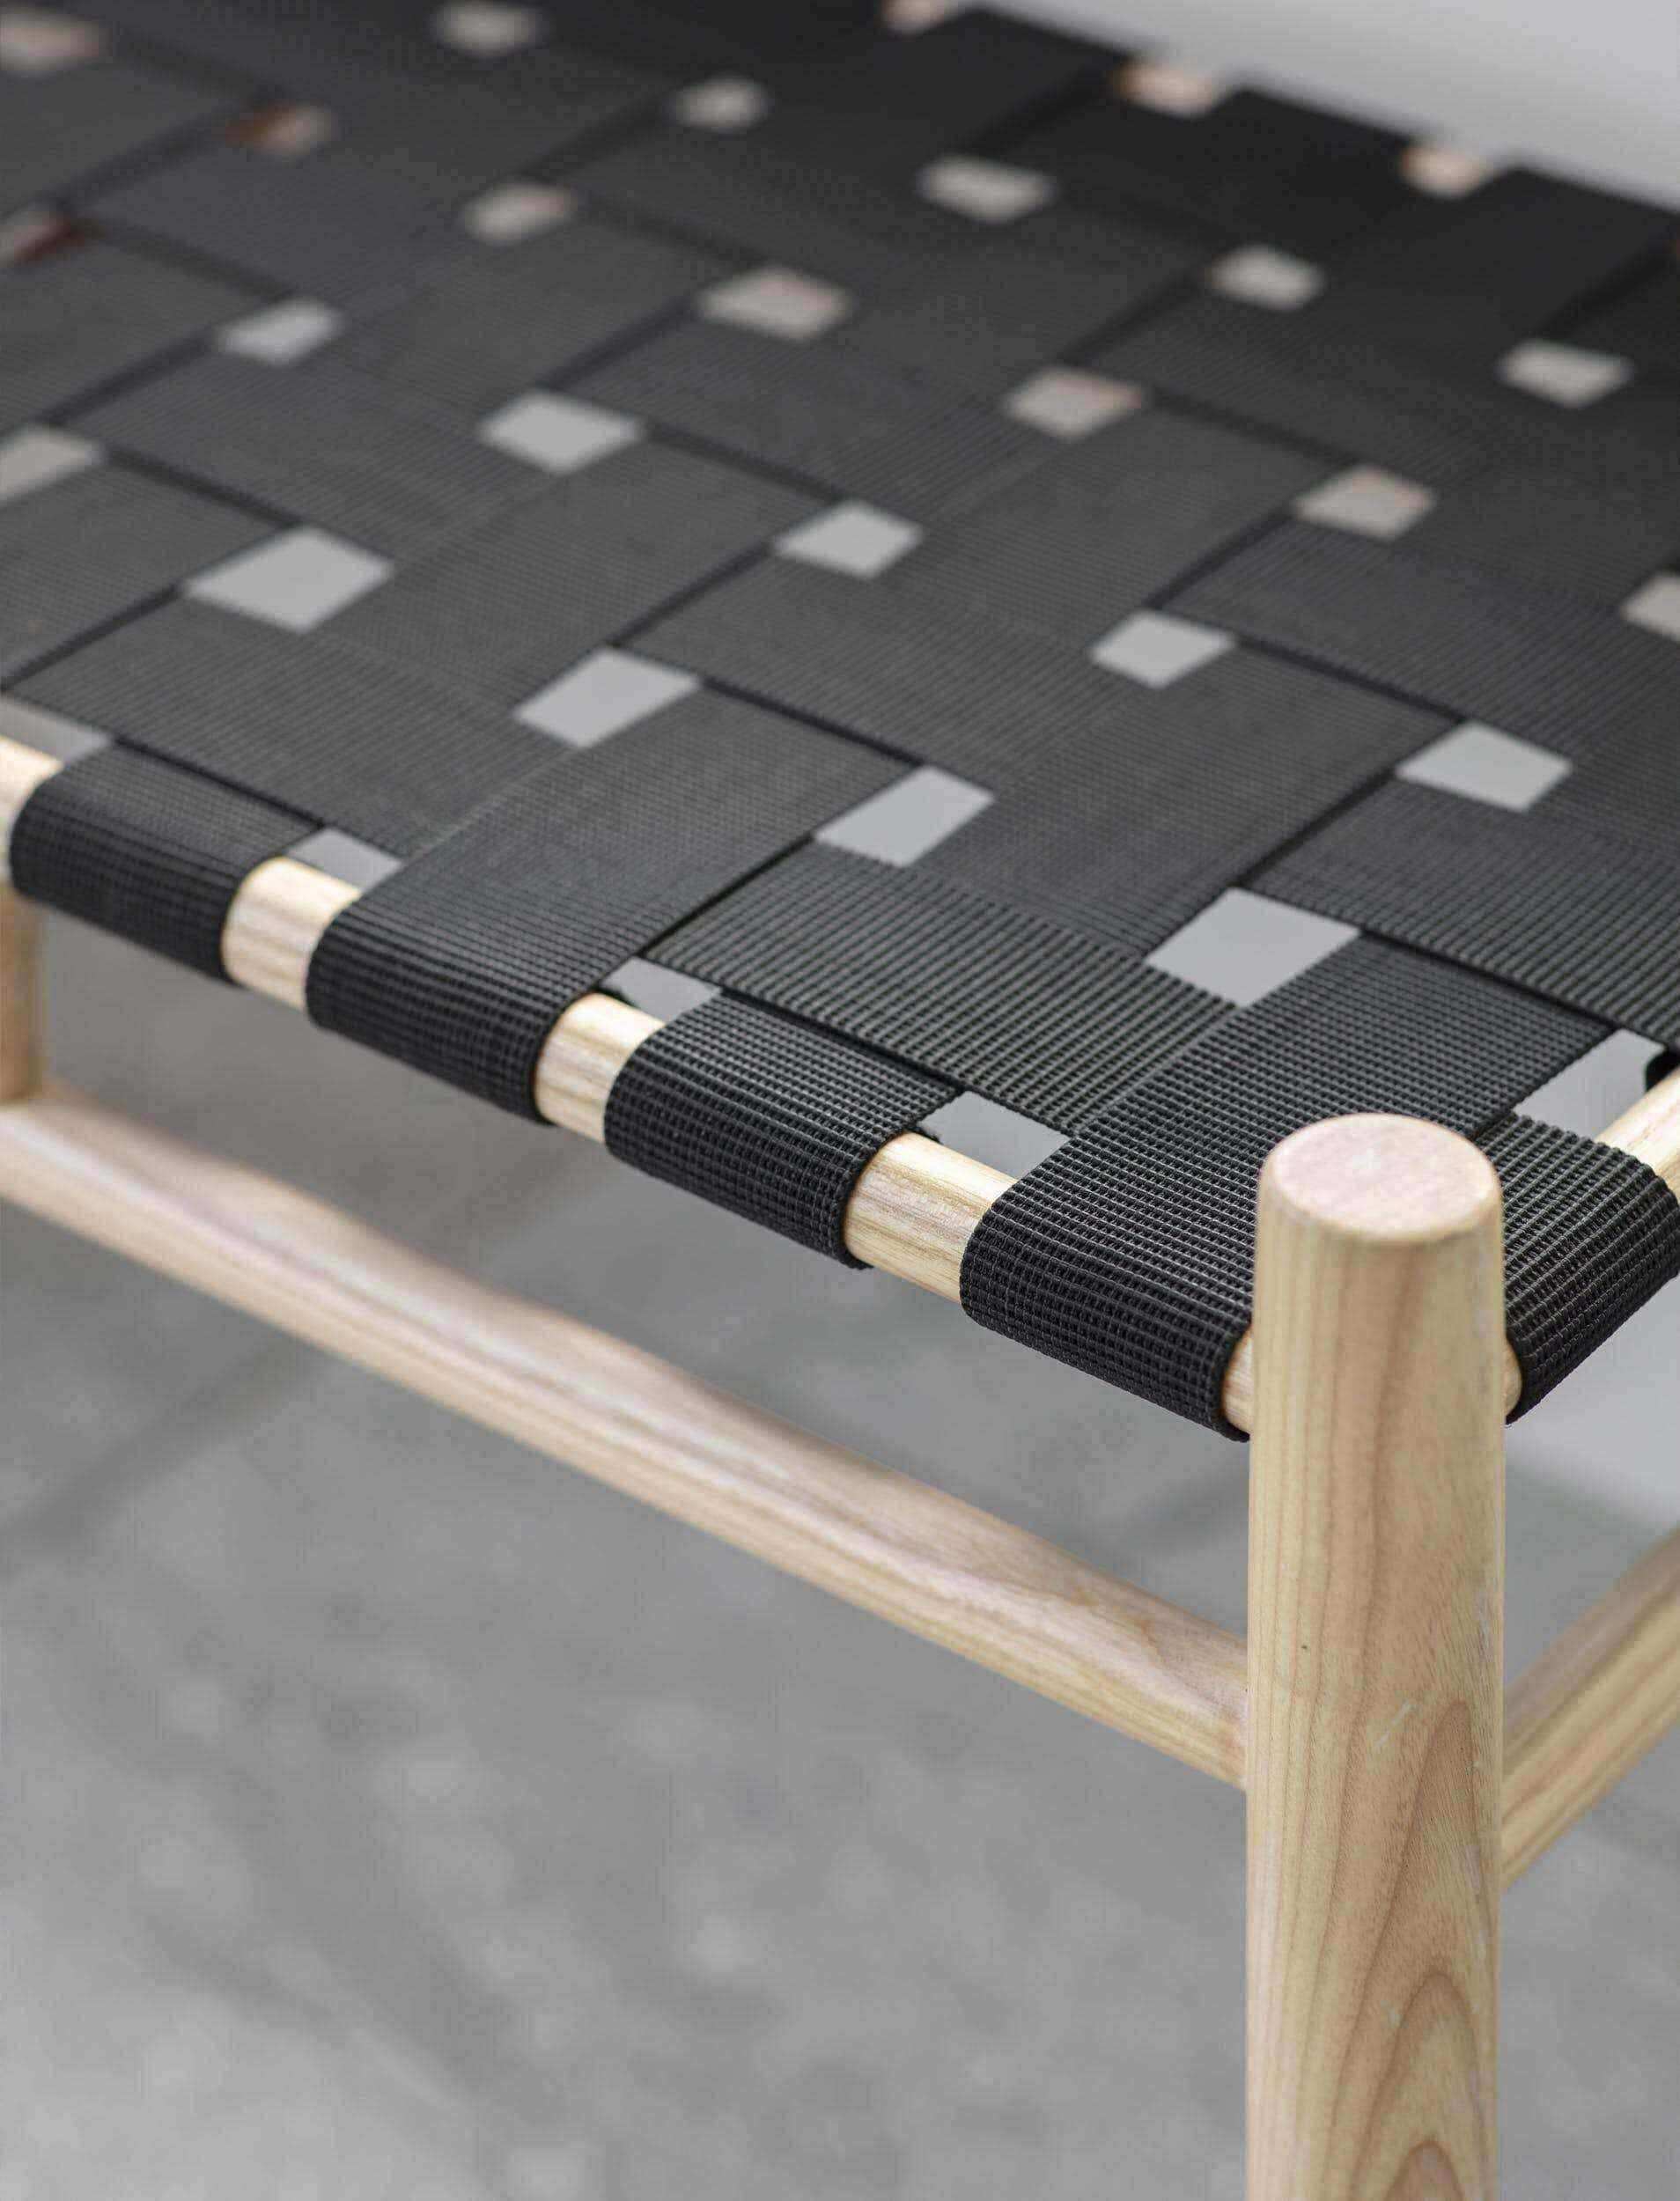 Woven Strap Top Bench - The Farthing